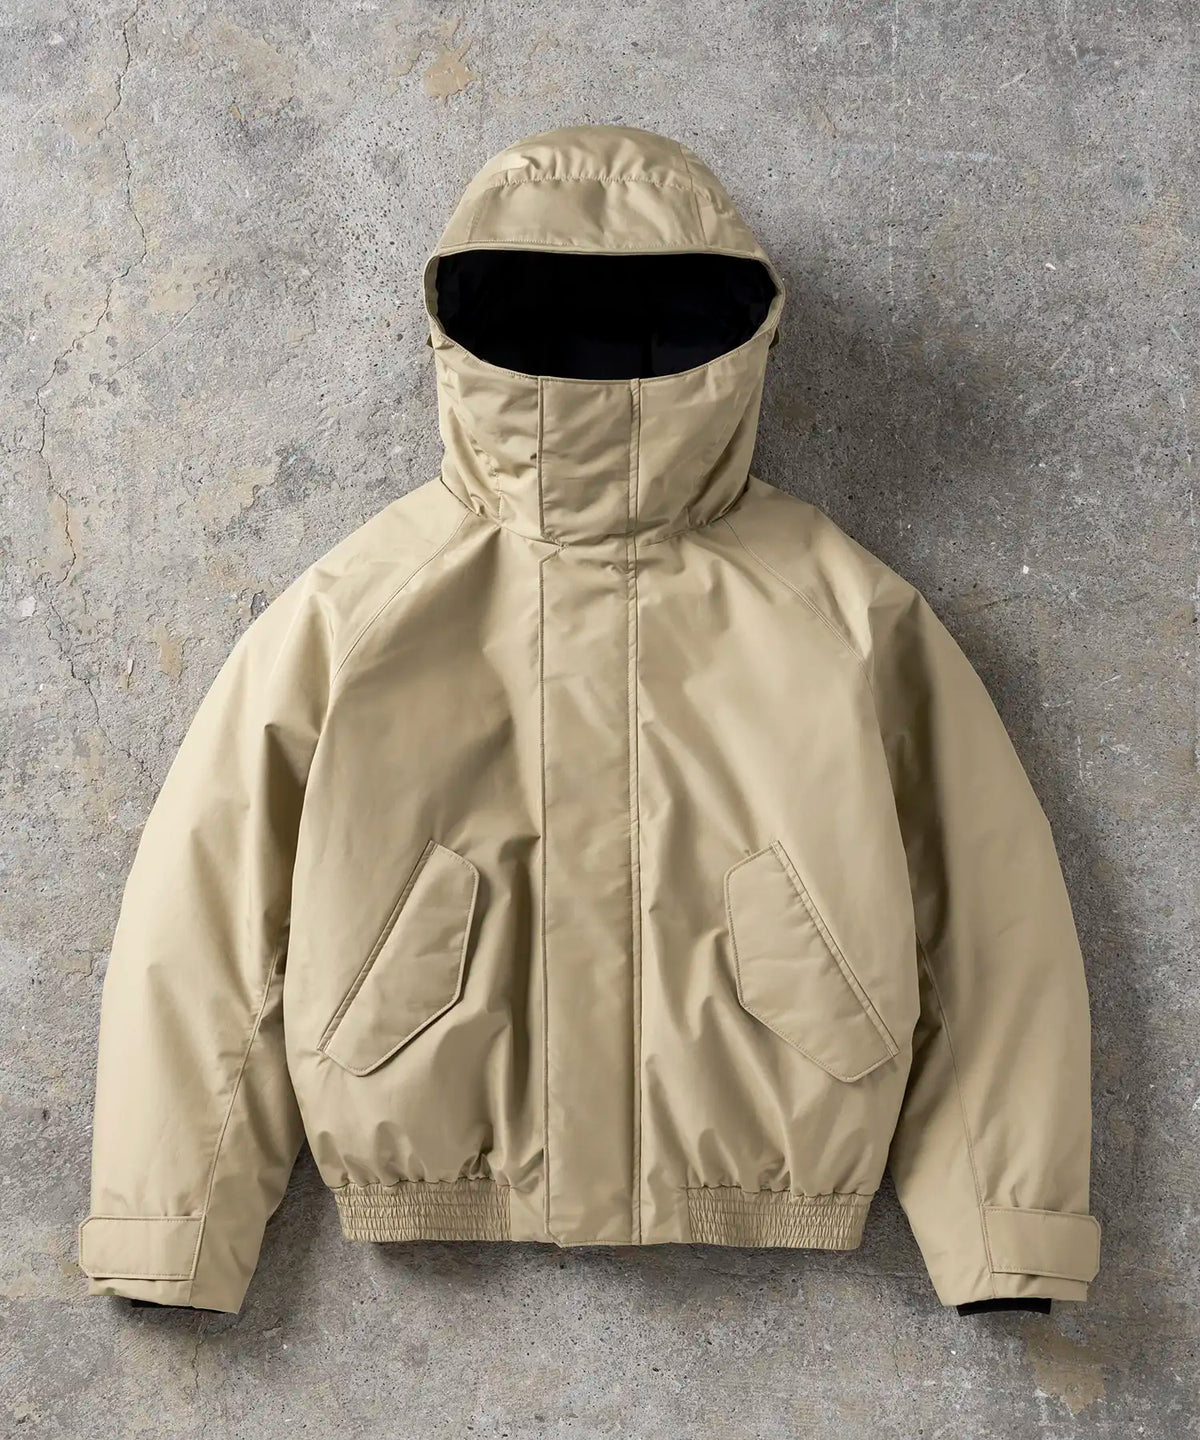 【MENS】GORE DOWN BOMBER JACKET / WINDSTOPPER(R) プロダクト BY GORE‑TEX LABS 2023年10月下旬お届け